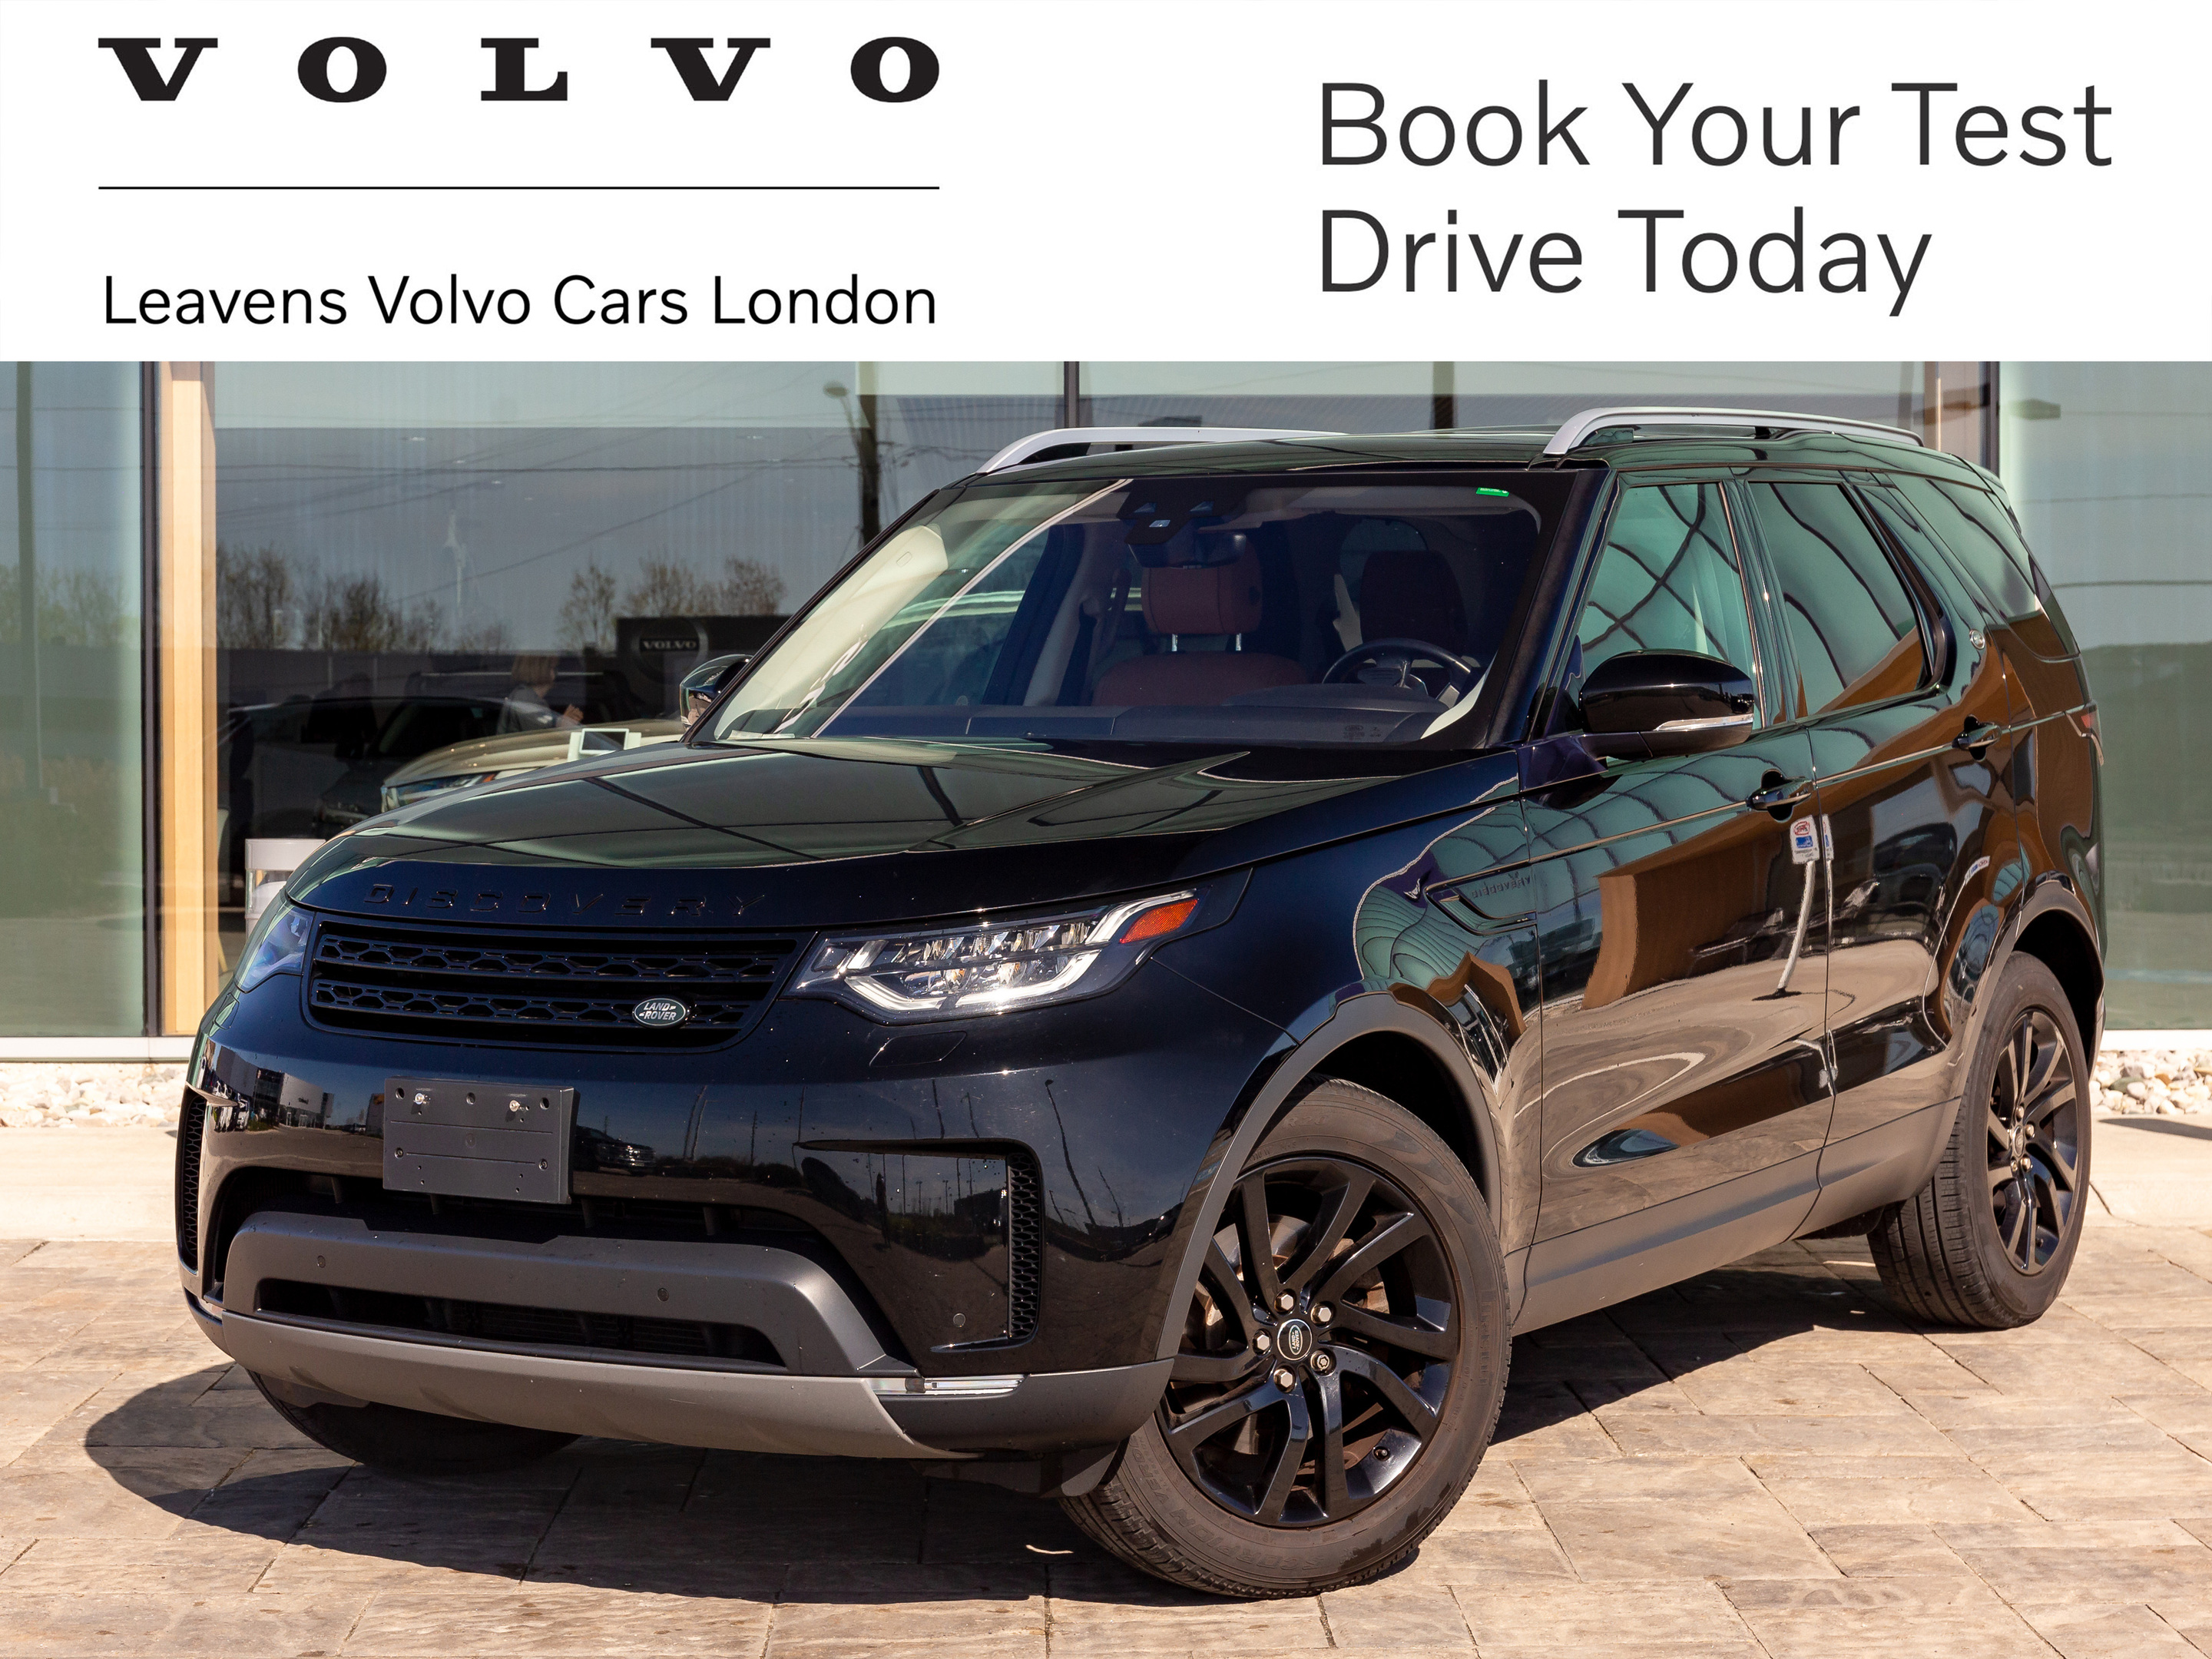 2017 Land Rover Discovery HSE | New Rear Brakes | Always Serviced at LR